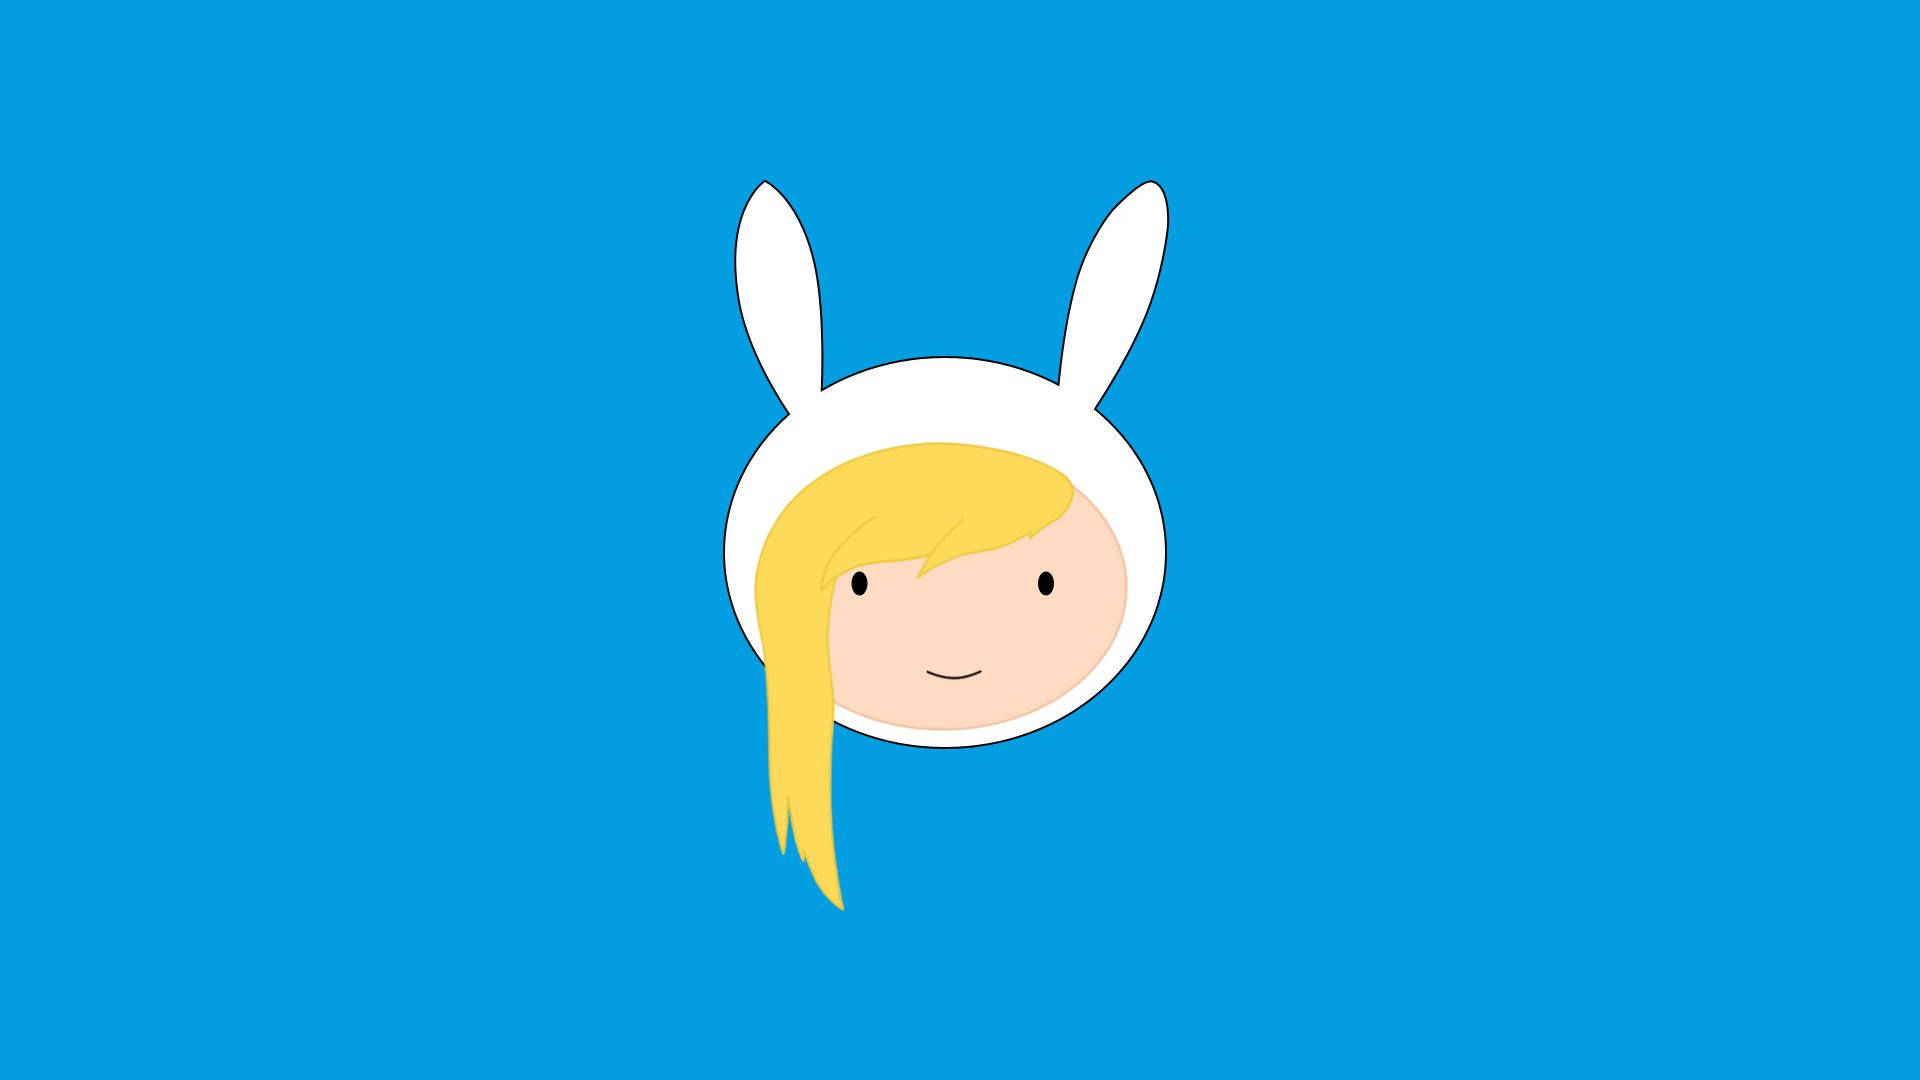 Adventure Time Fionna The Human